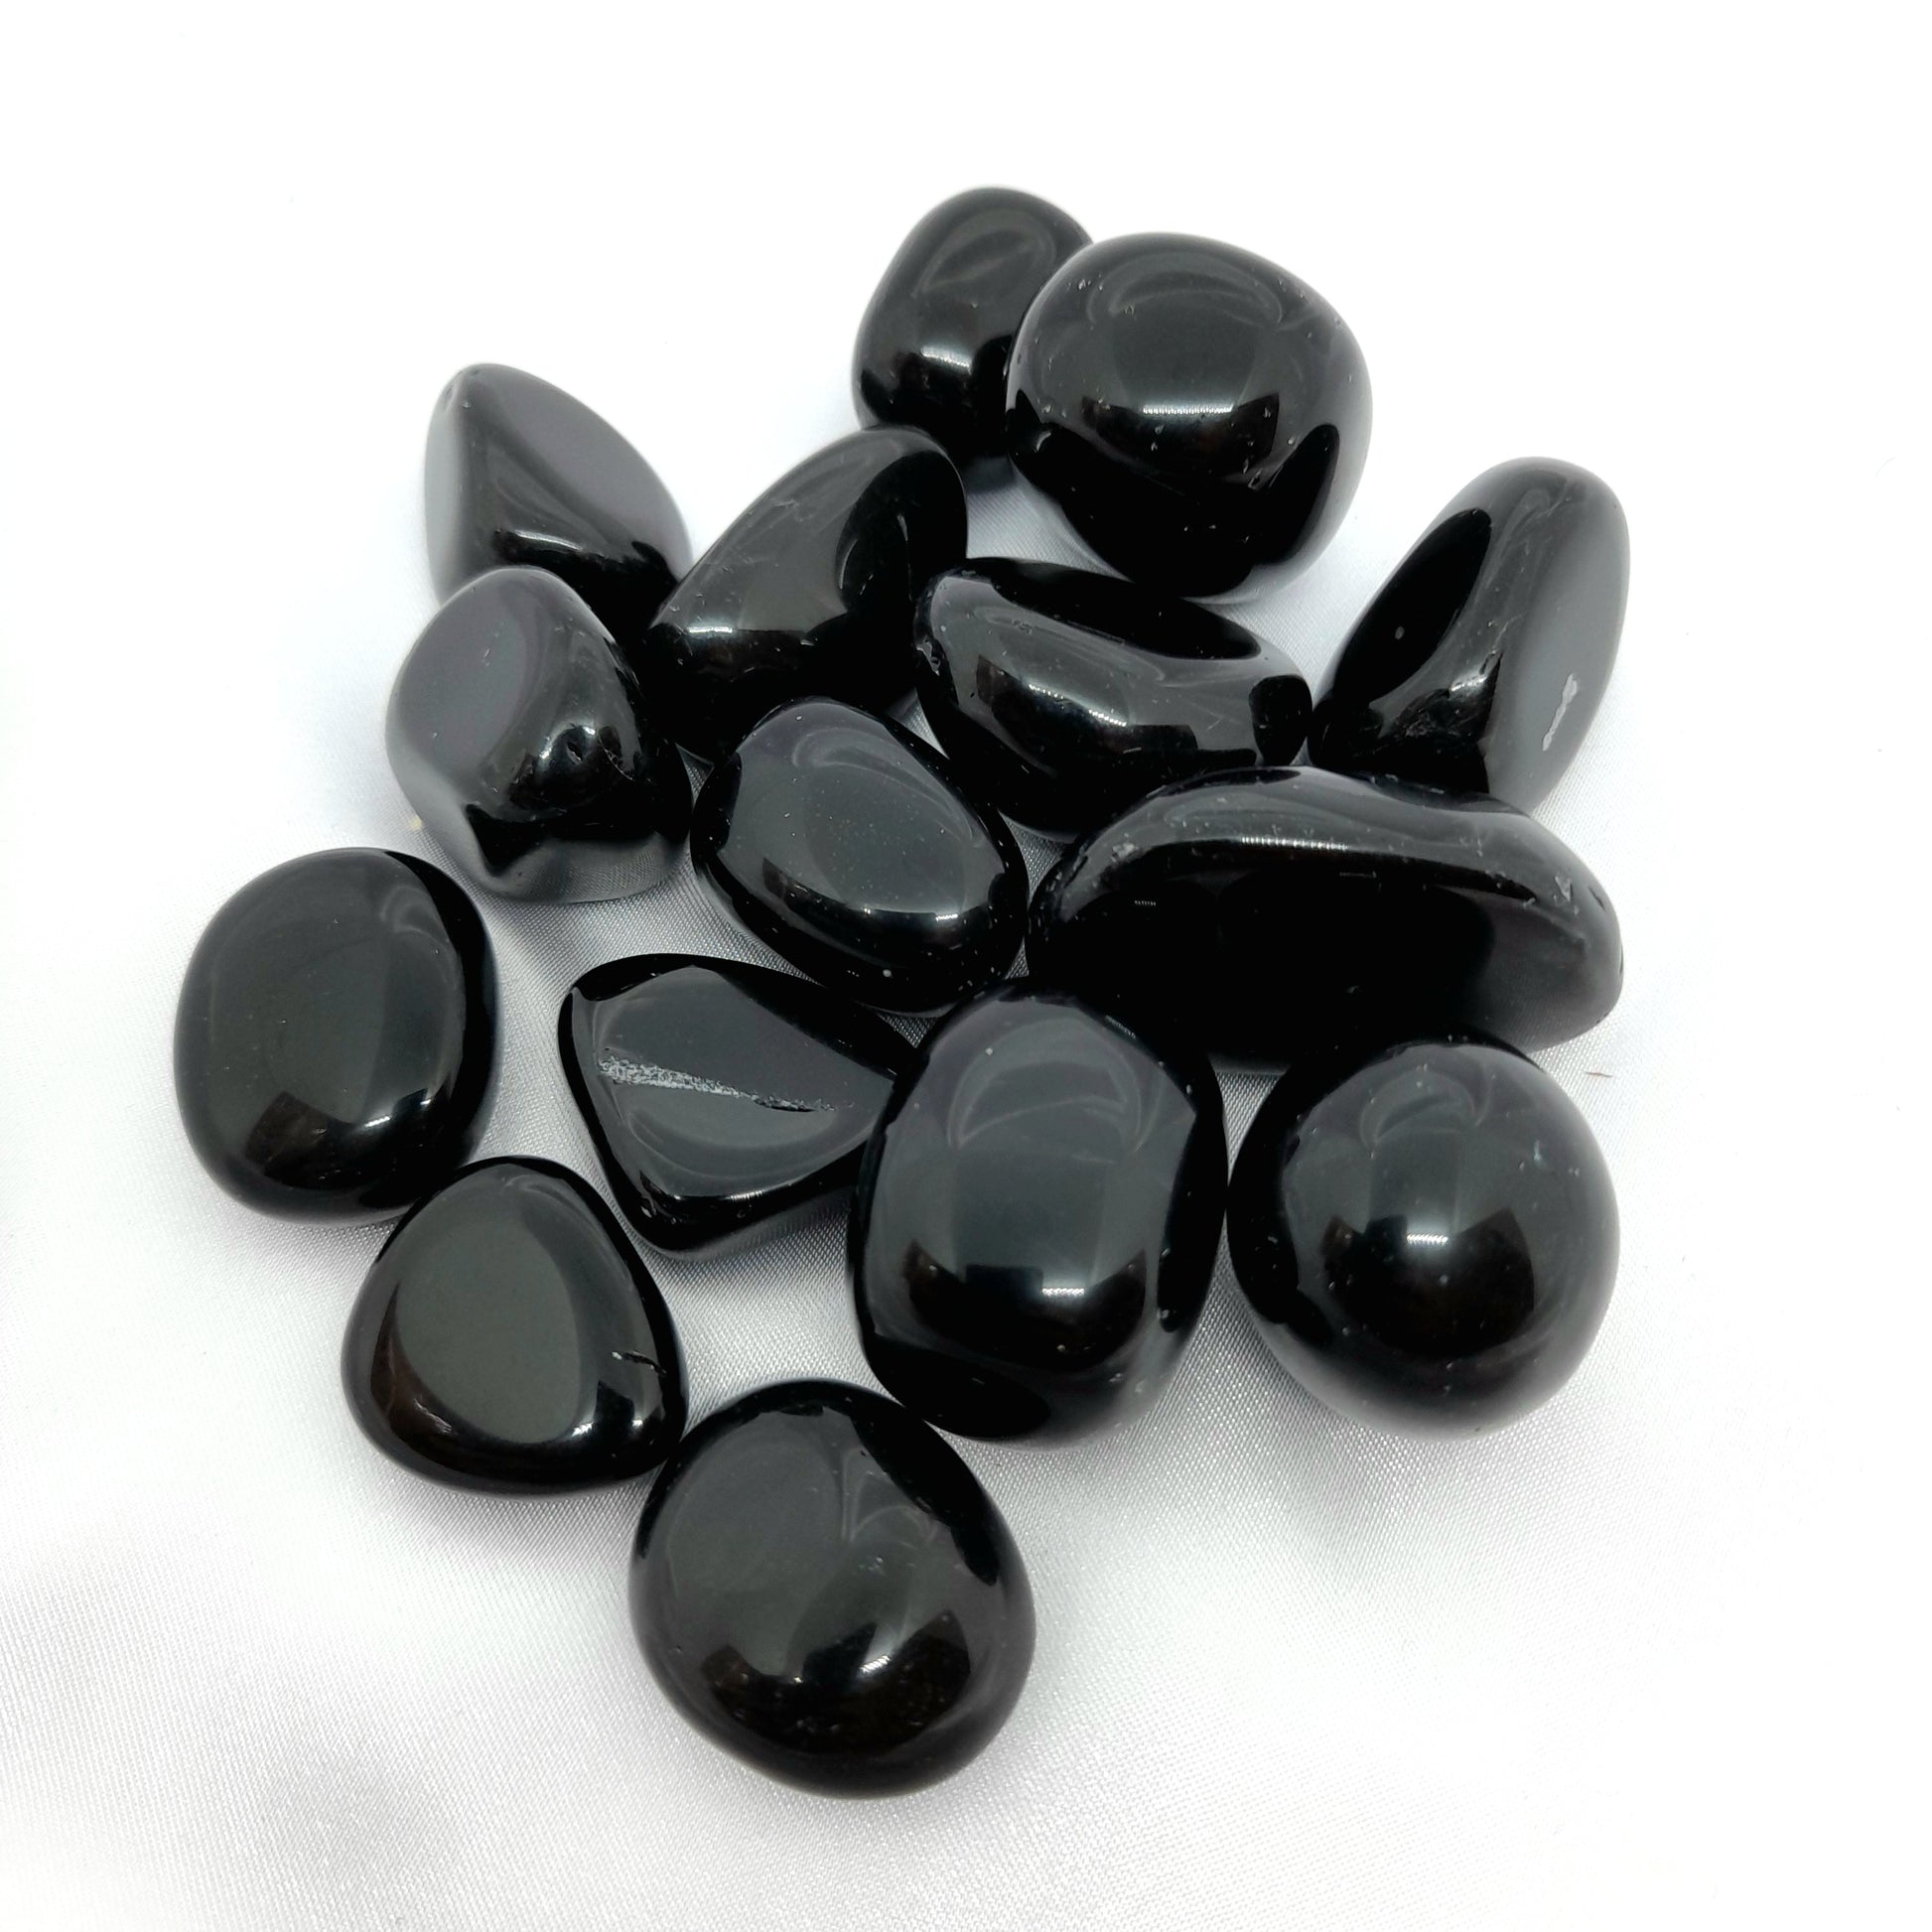 Black Obsidian Tumbled Stone - Powerful Protective Crystal with Unique Energies - Absorbs Negative Energy, Blocks Psychic Attacks, and Cleanses Surroundings